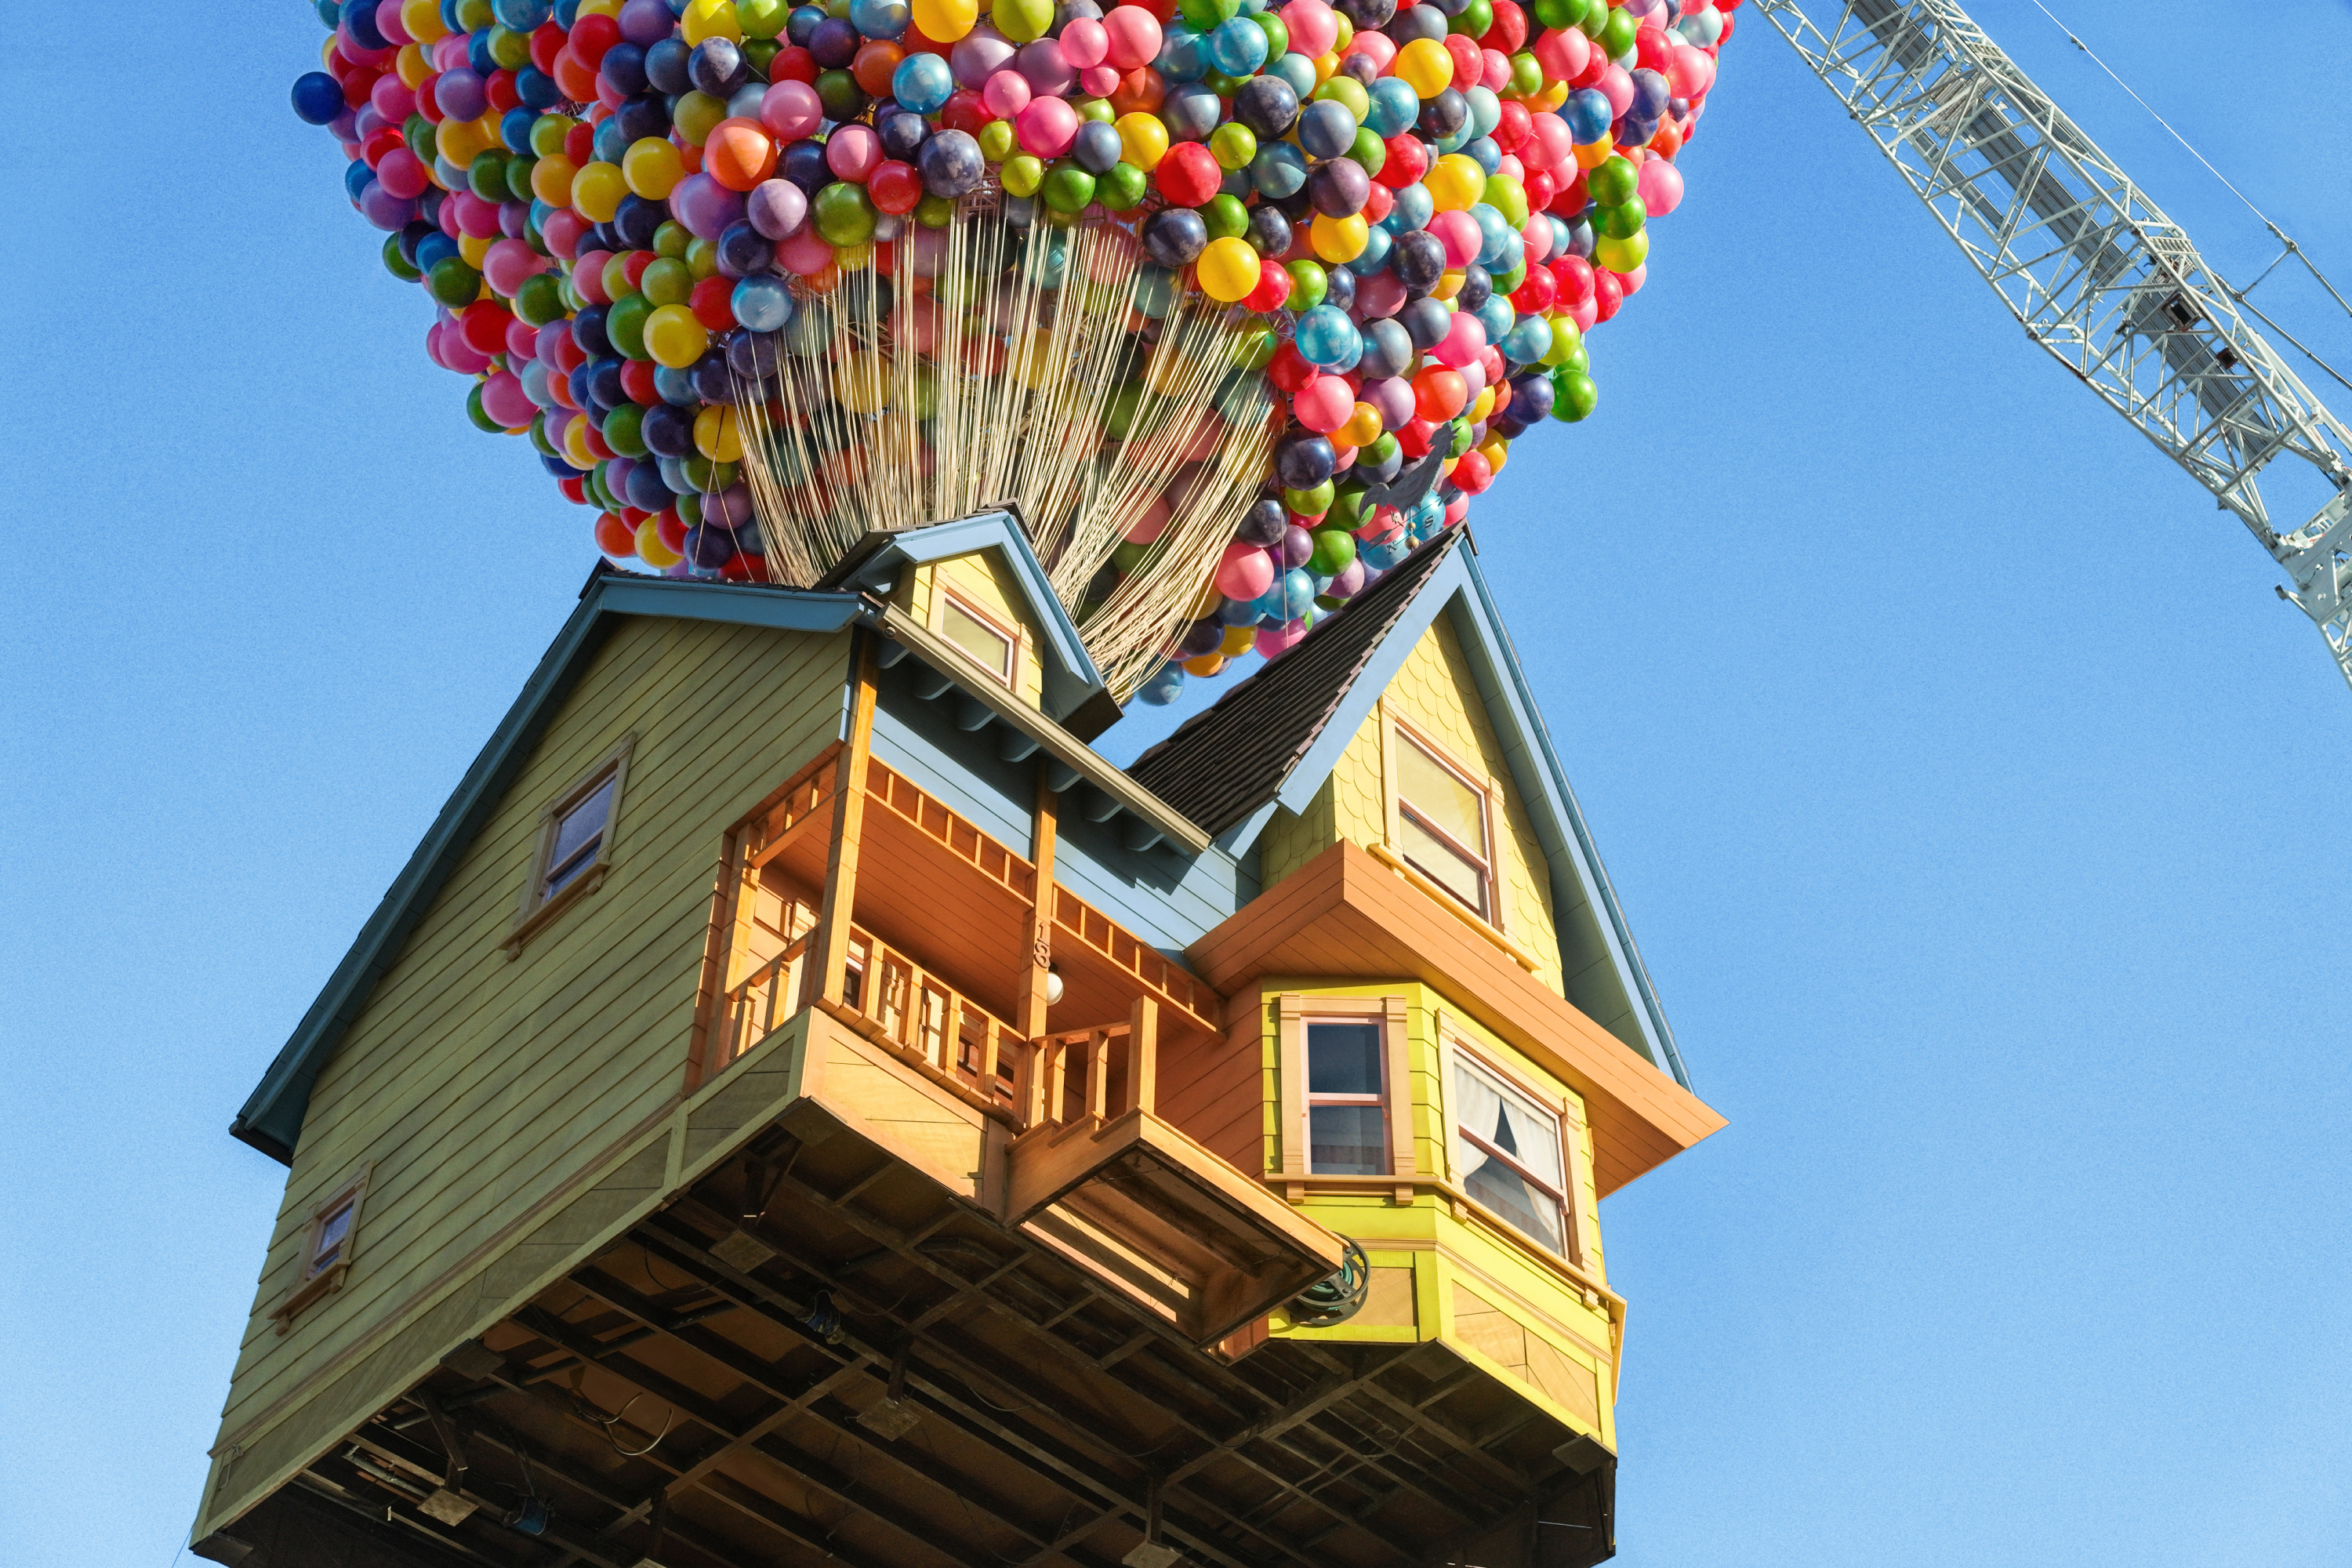 House lifted by myriad balloons against a blue sky, reminiscent of the animated film &quot;Up.&quot;